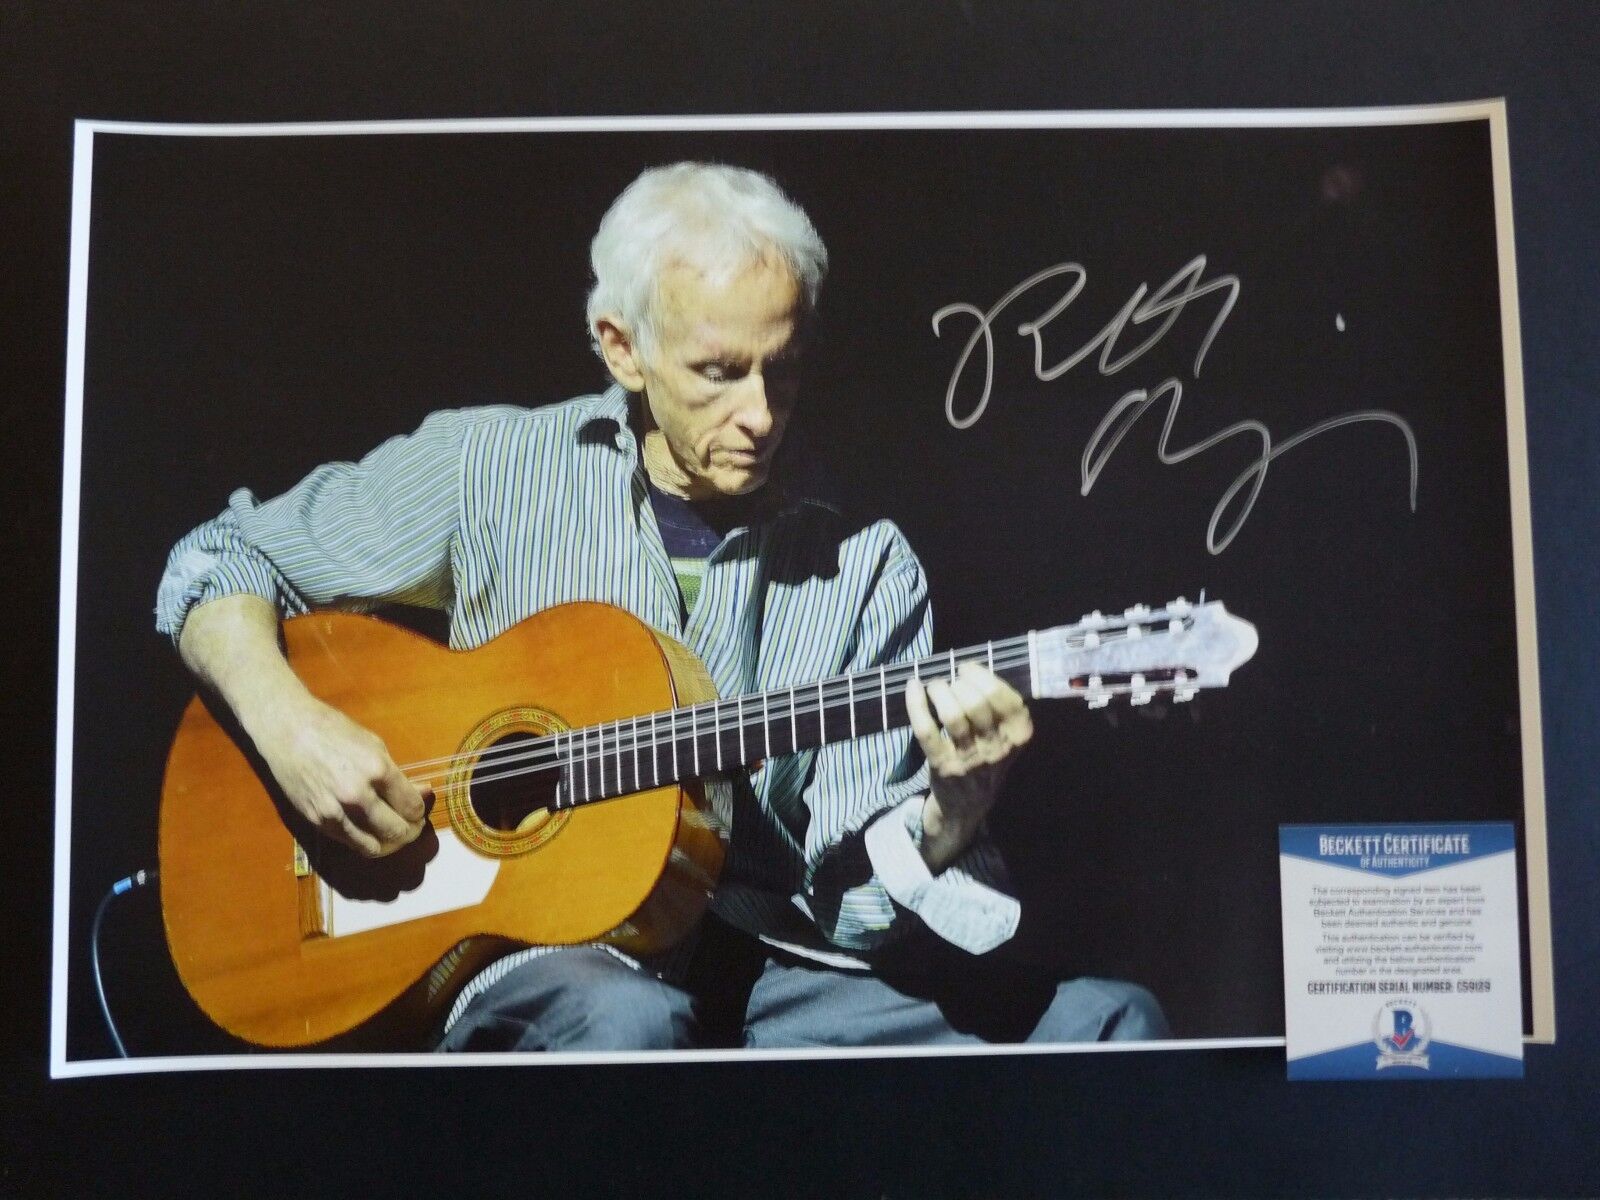 Robby Krieger The Doors Signed Autographed 11x17 Photo Poster painting Beckett Certified #4